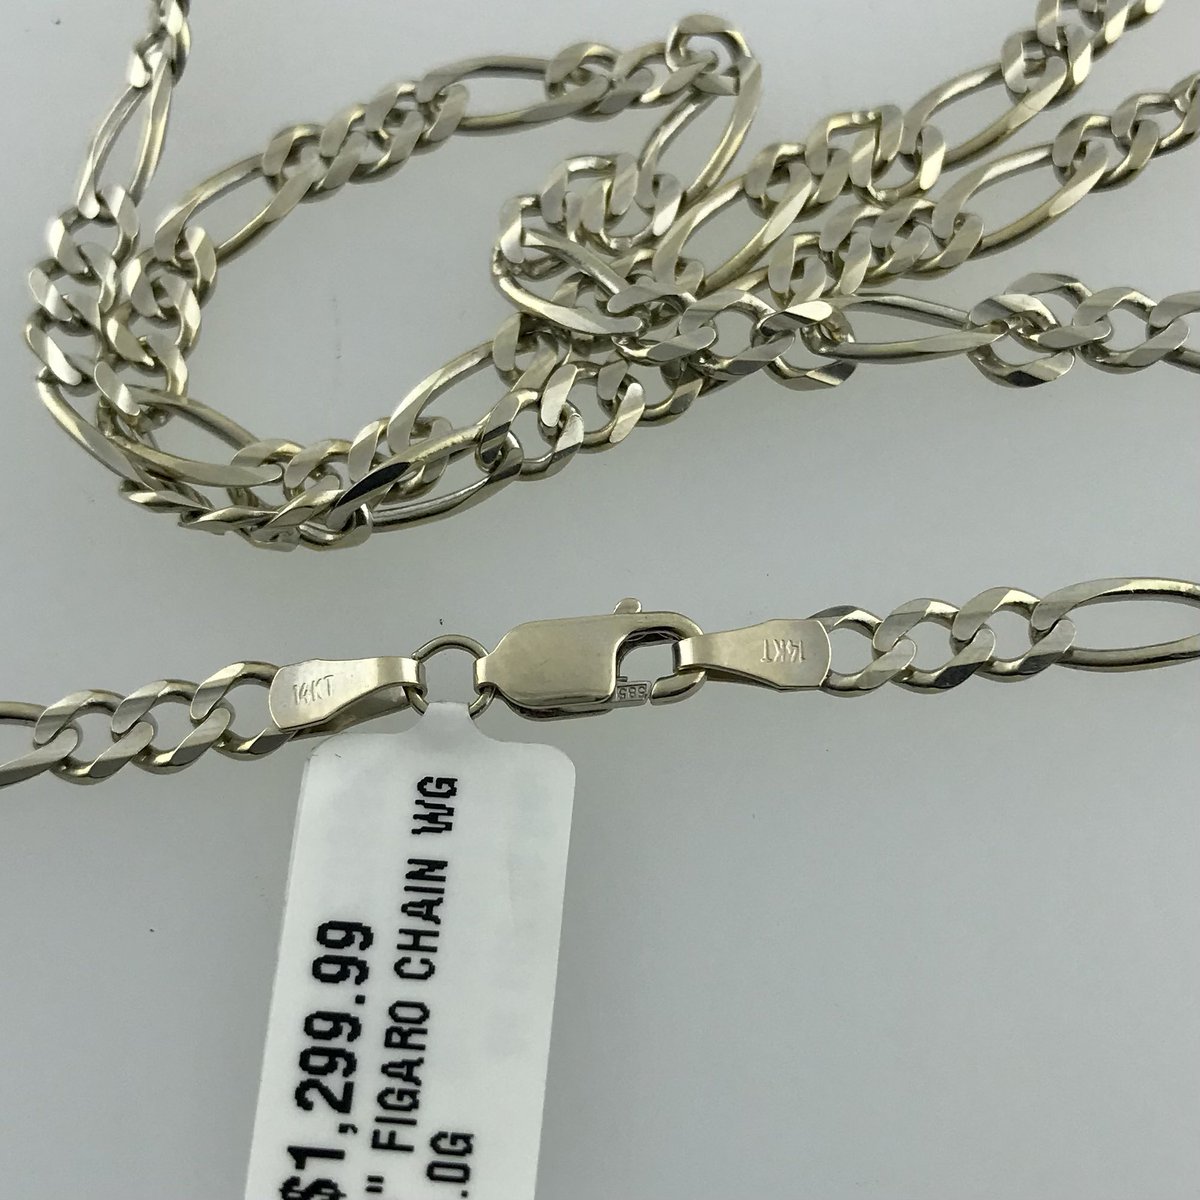 Available now! 24 inch white gold figaro chain! Weighs 14.0 grams and 4.25mm wide! Regularly priced at $1299.99 but currently 40% off! Yours for only $860 out the door! #pawnshop #oakland #sanfrancisco #pawnshopdeals #bestcollateral #gold #whitegold #figarochain #goldchain